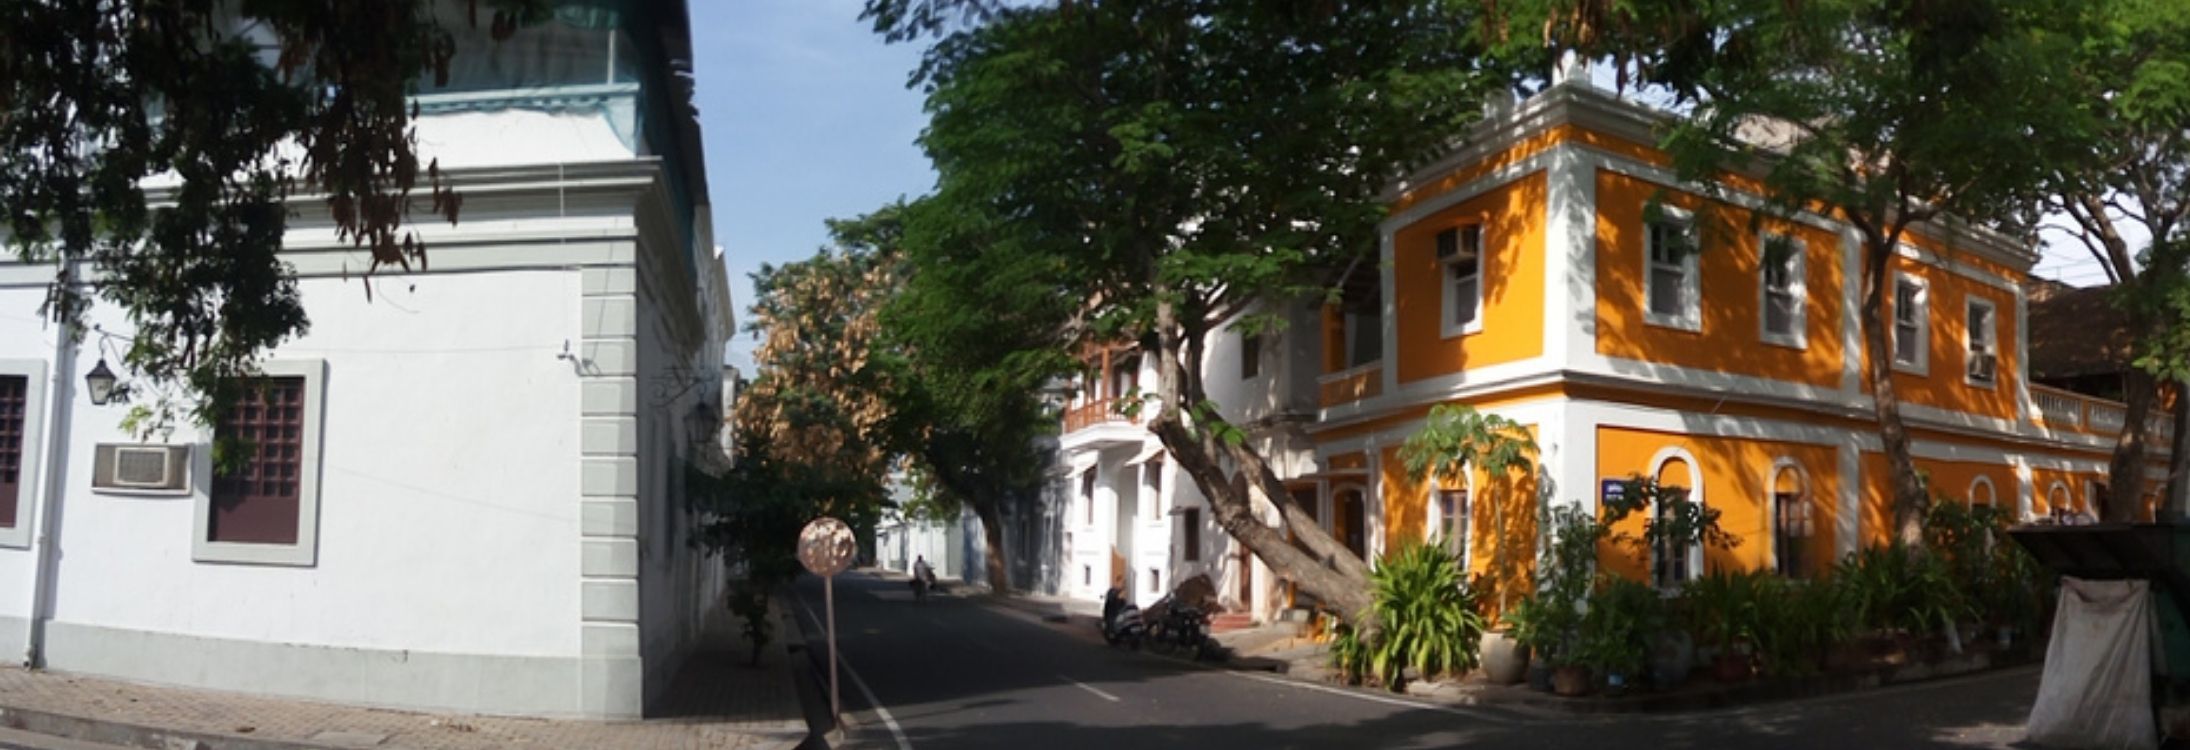 What the French left behind in Pondicherry  Architecture